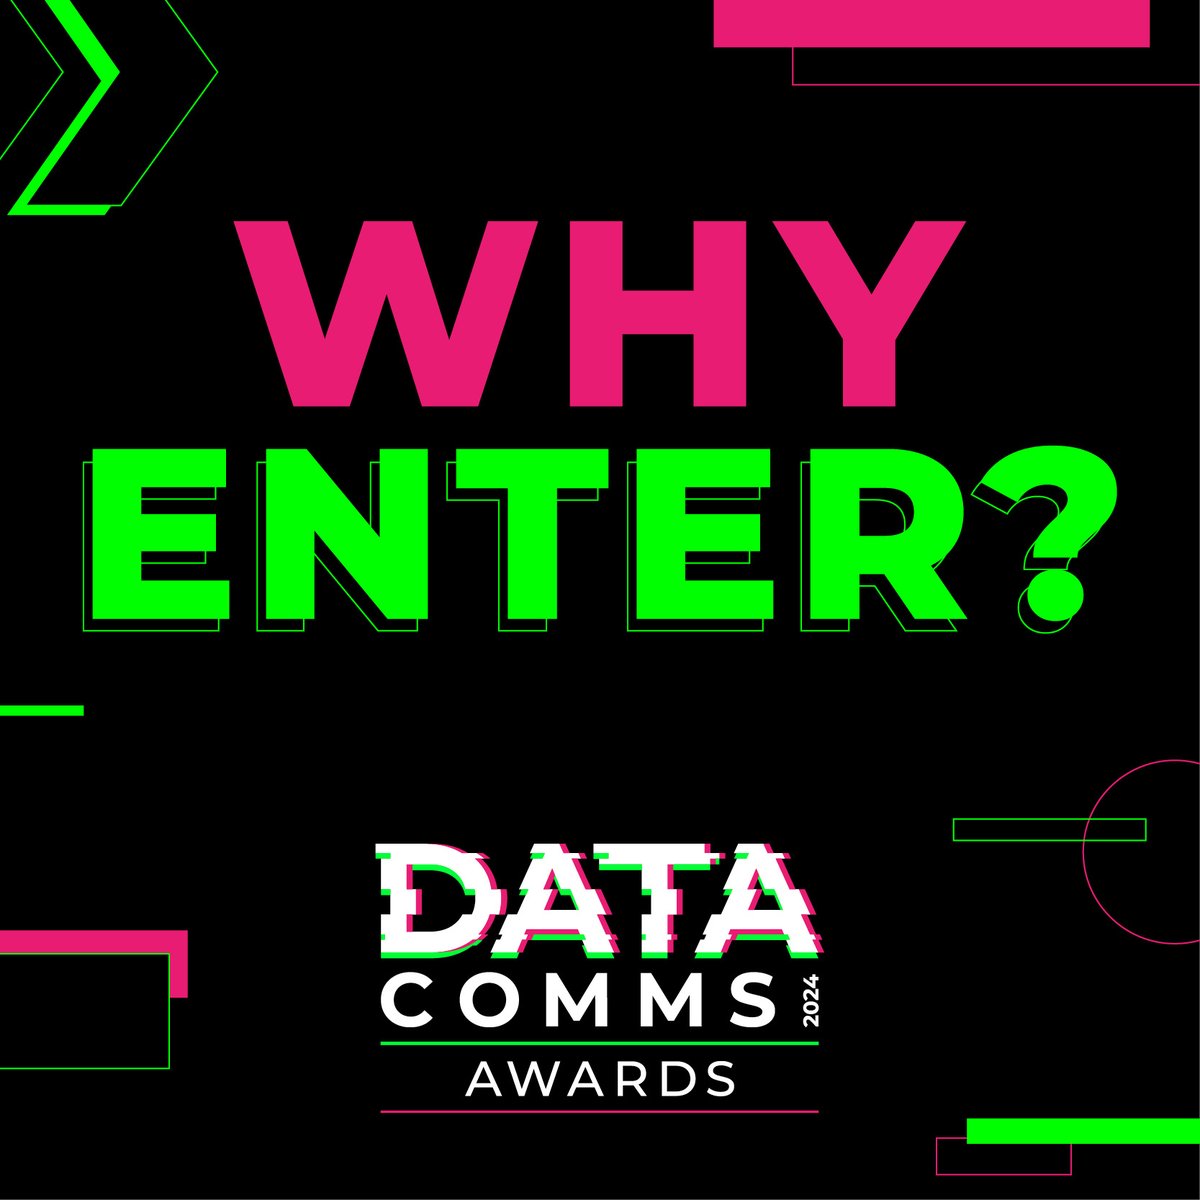 Entering the DataComms awards 2024!
The benefits of entering the DataComms Awards include:
✅ Celebrate and reward innovation.
✅ Gain a benchmark for data communications excellence.
✅ Improve credibility, retain clients and gain new business.
📷#DataComms